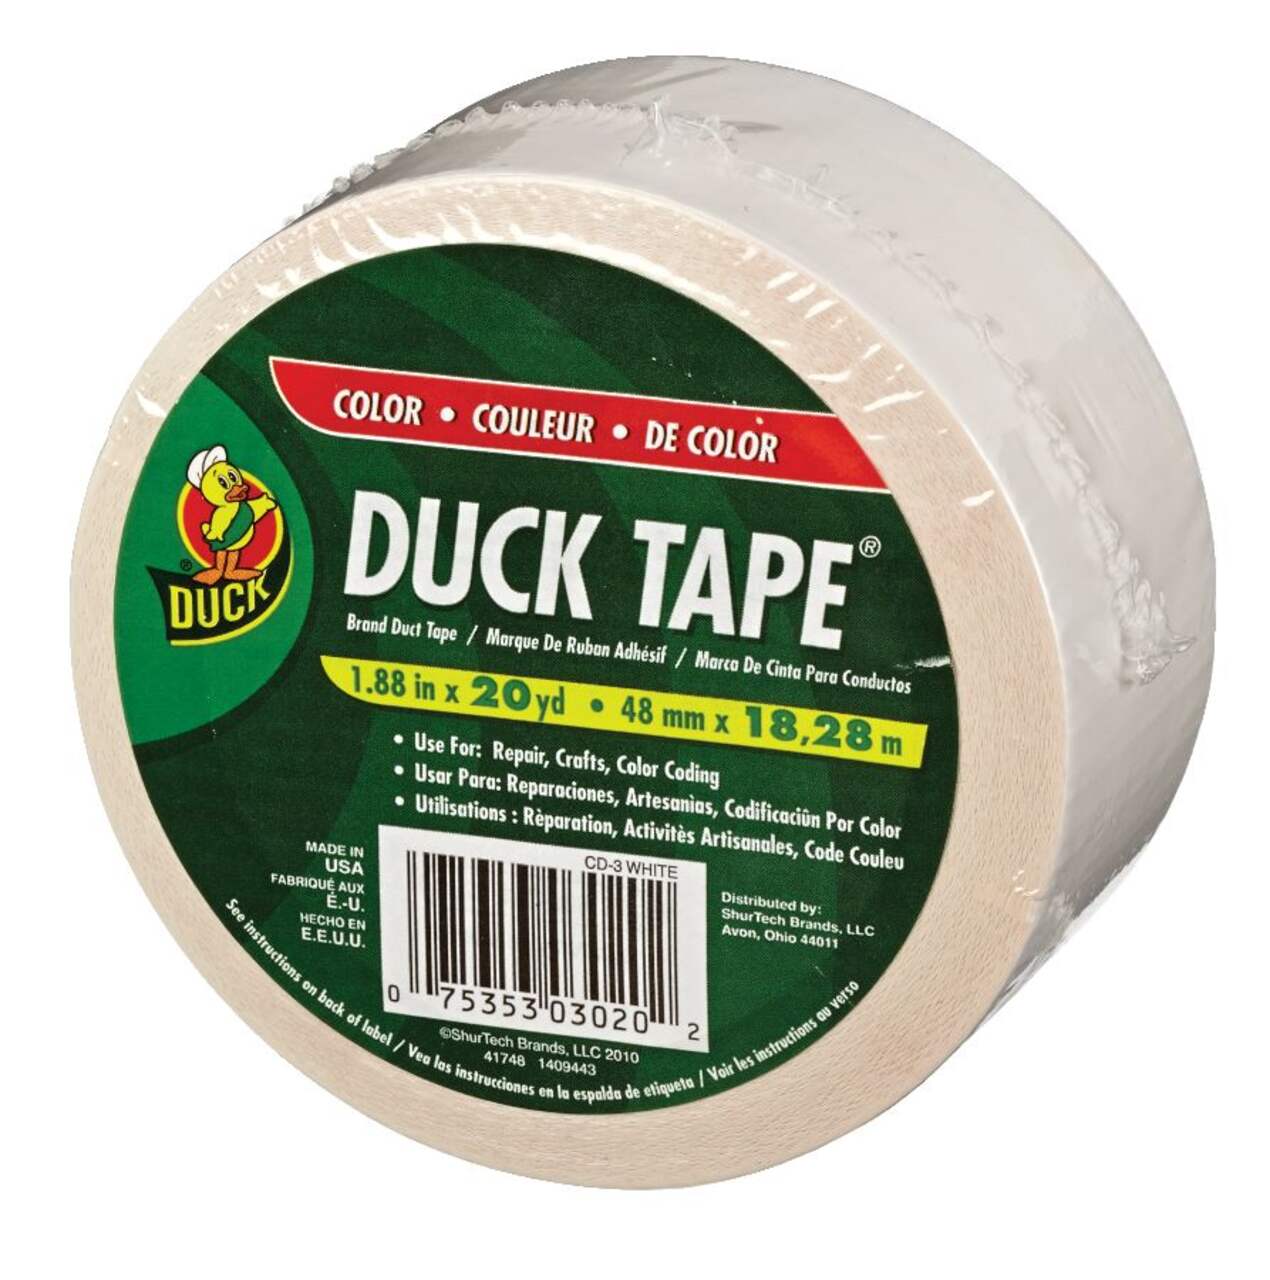 Duck Brand 1.88 in. x 55 yd. Silver Original Duct Tape 